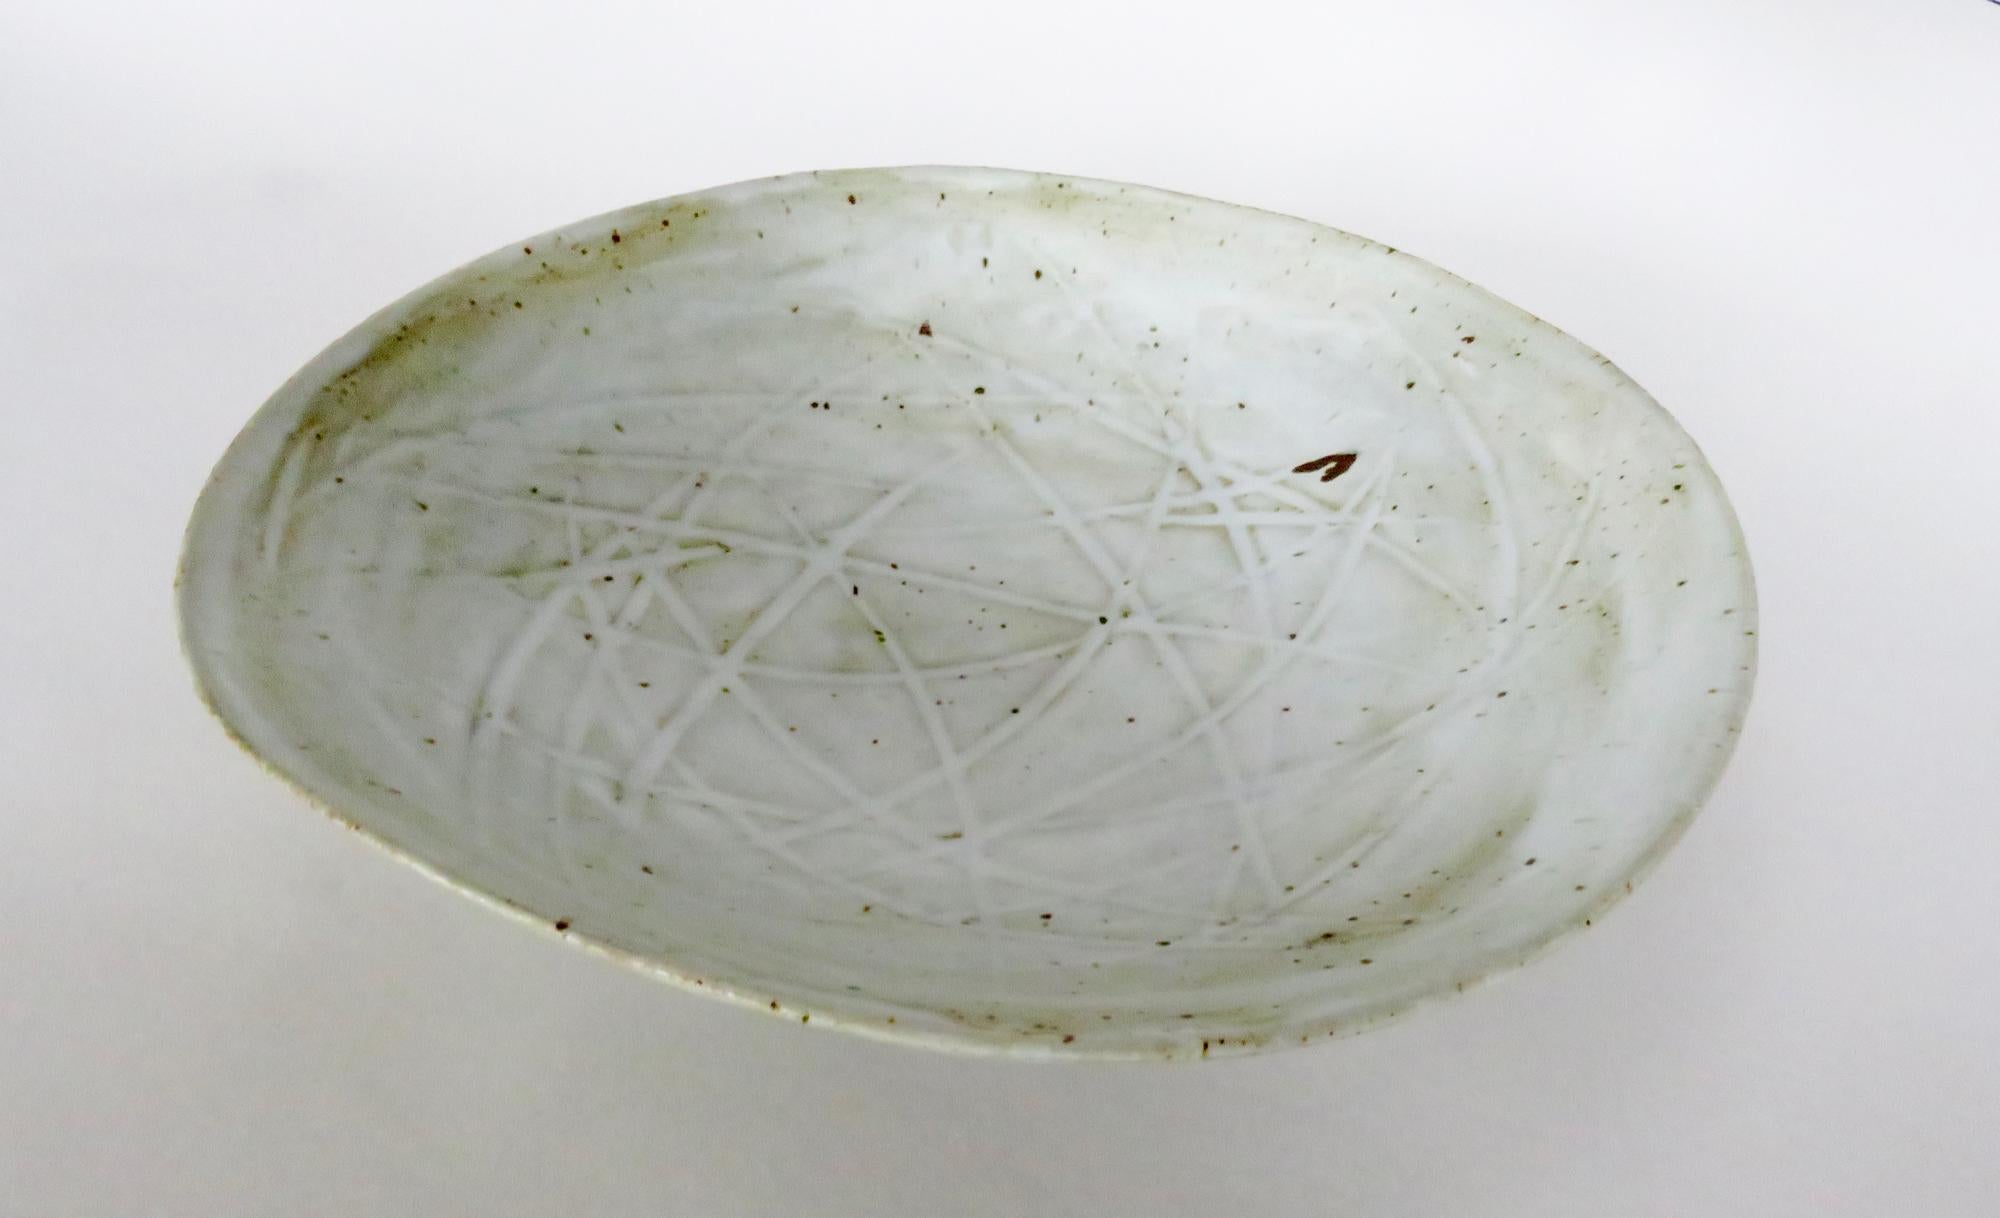 Large footed ceramic serving bowl. Glazed in a creamy off-white glaze that allows the color of the clay body to peer through with deep off-white tones and random iron speckling. The interior is lightly carved with geometric lines to give added